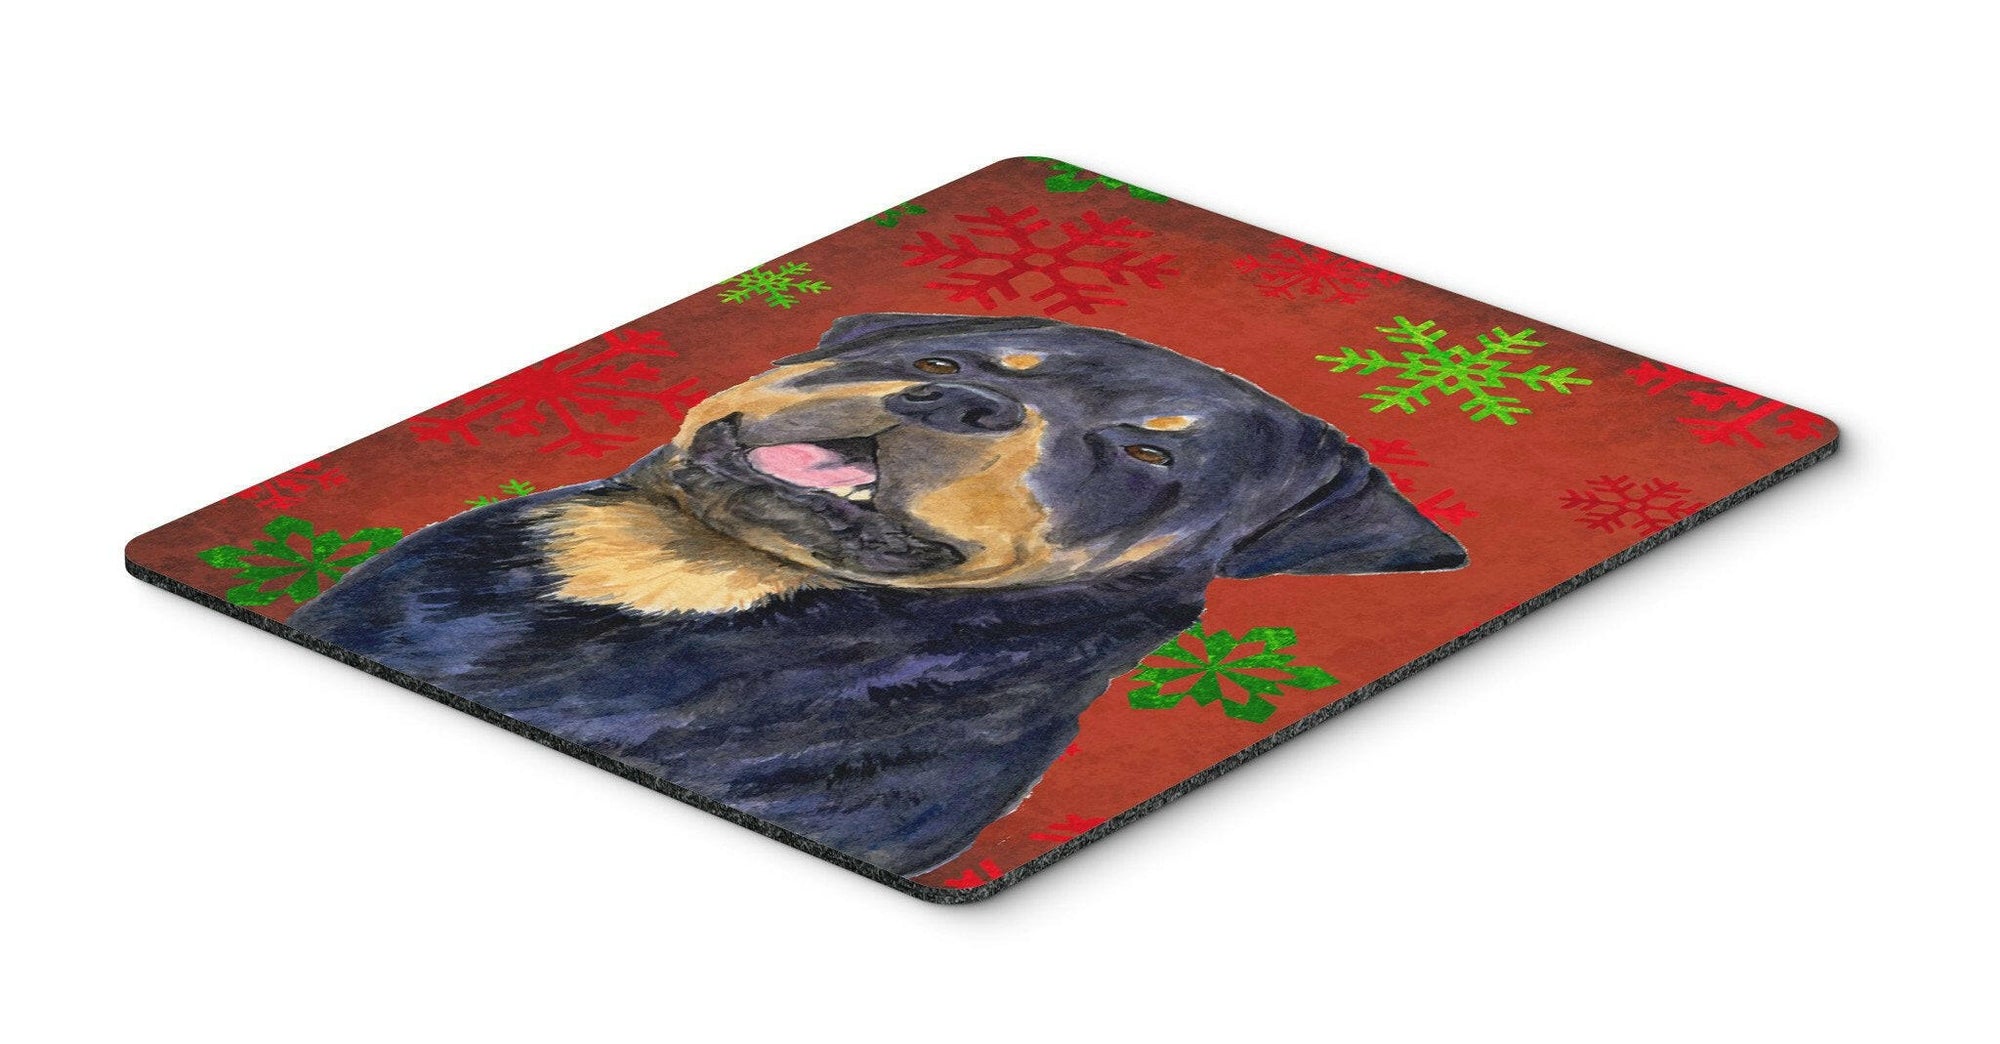 Rottweiler Red and Green Snowflakes Christmas Mouse Pad, Hot Pad or Trivet by Caroline's Treasures